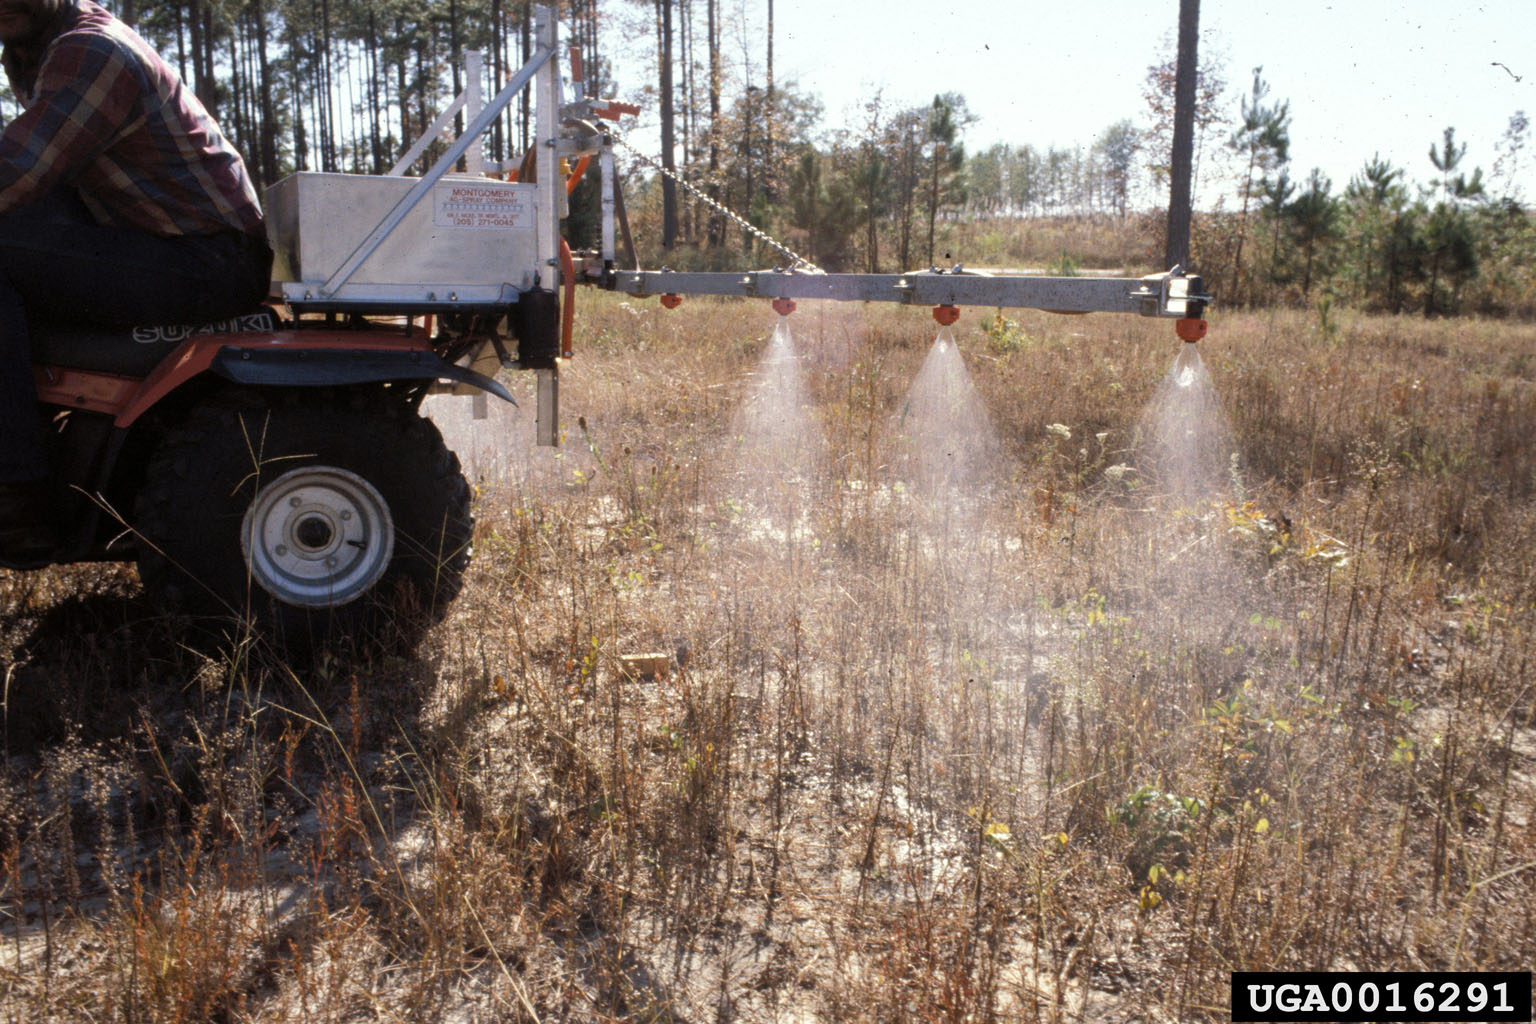 image of a 4-wheeler applying herbicide on a tree planting site